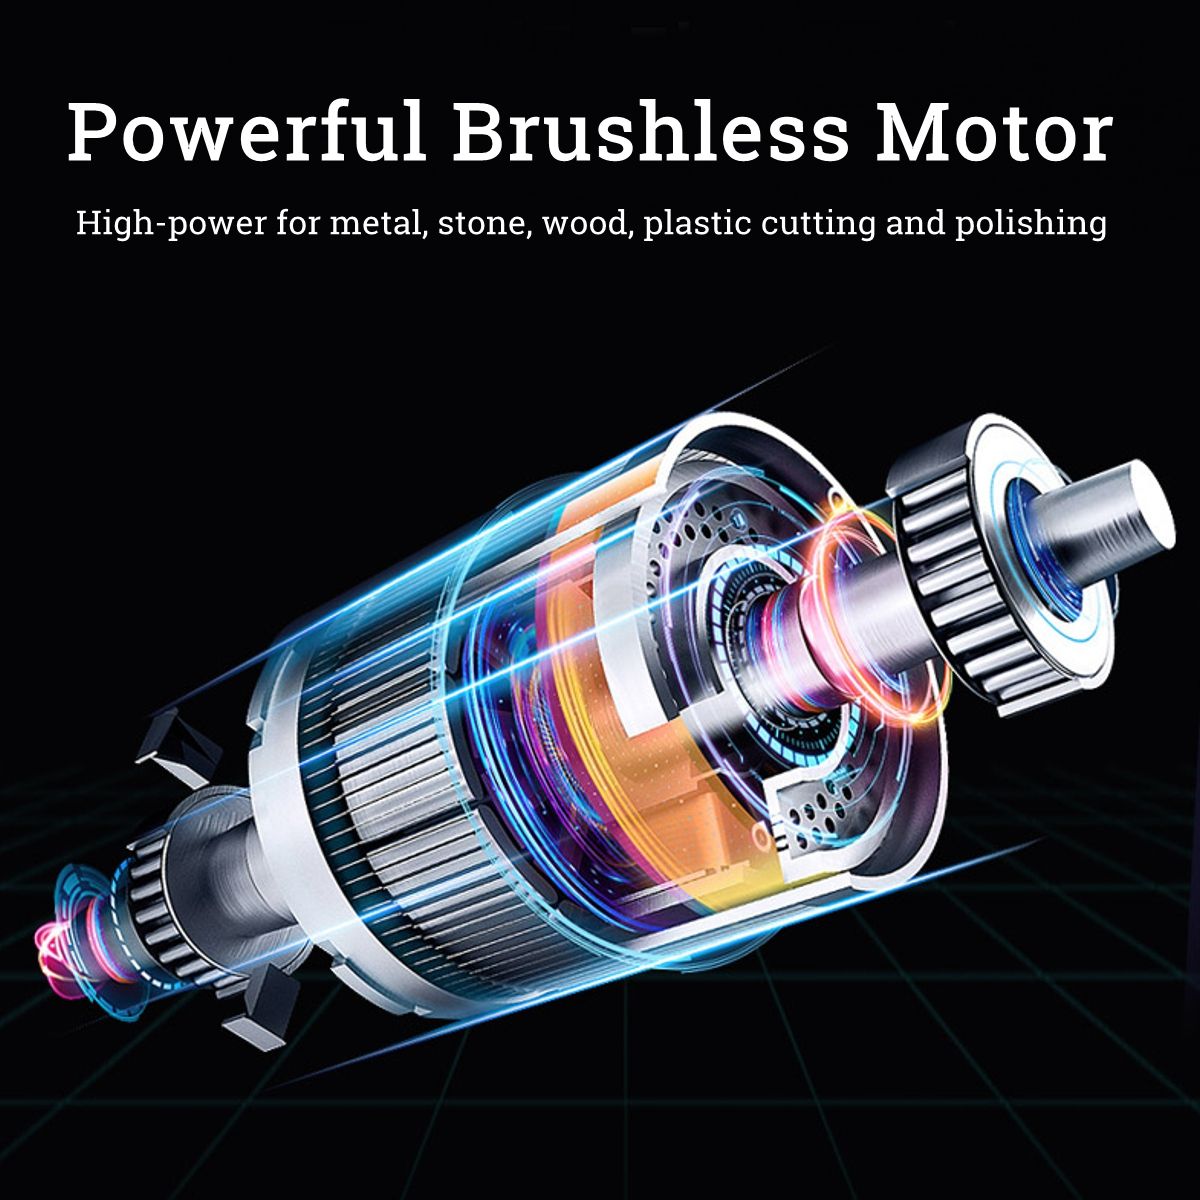 Cordless-Angle-Grinder-Electric-Lithium-Battery-Angle-Grinding-Polisher-Polishing-Machine-Cutting-To-1427035